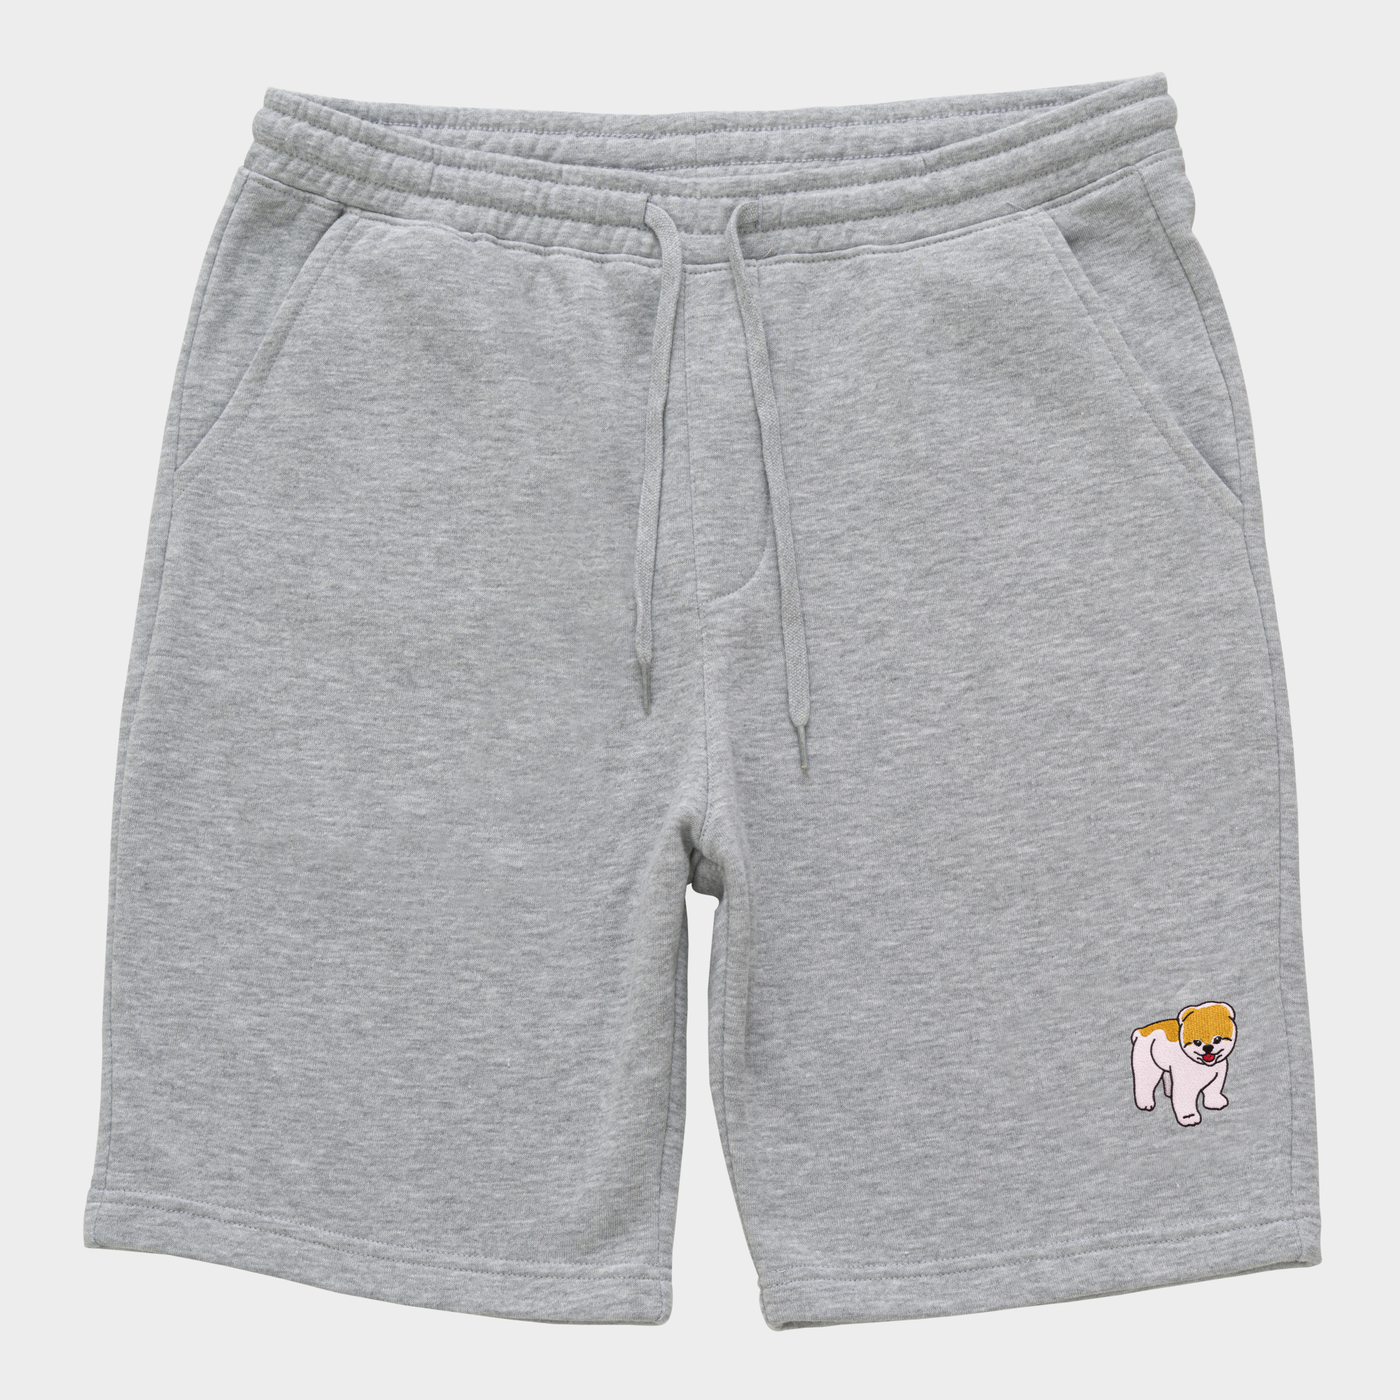 Bobby's Planet Men's Embroidered Pomeranian Shorts from Paws Dog Cat Animals Collection in Heather Grey Color#color_heather-grey